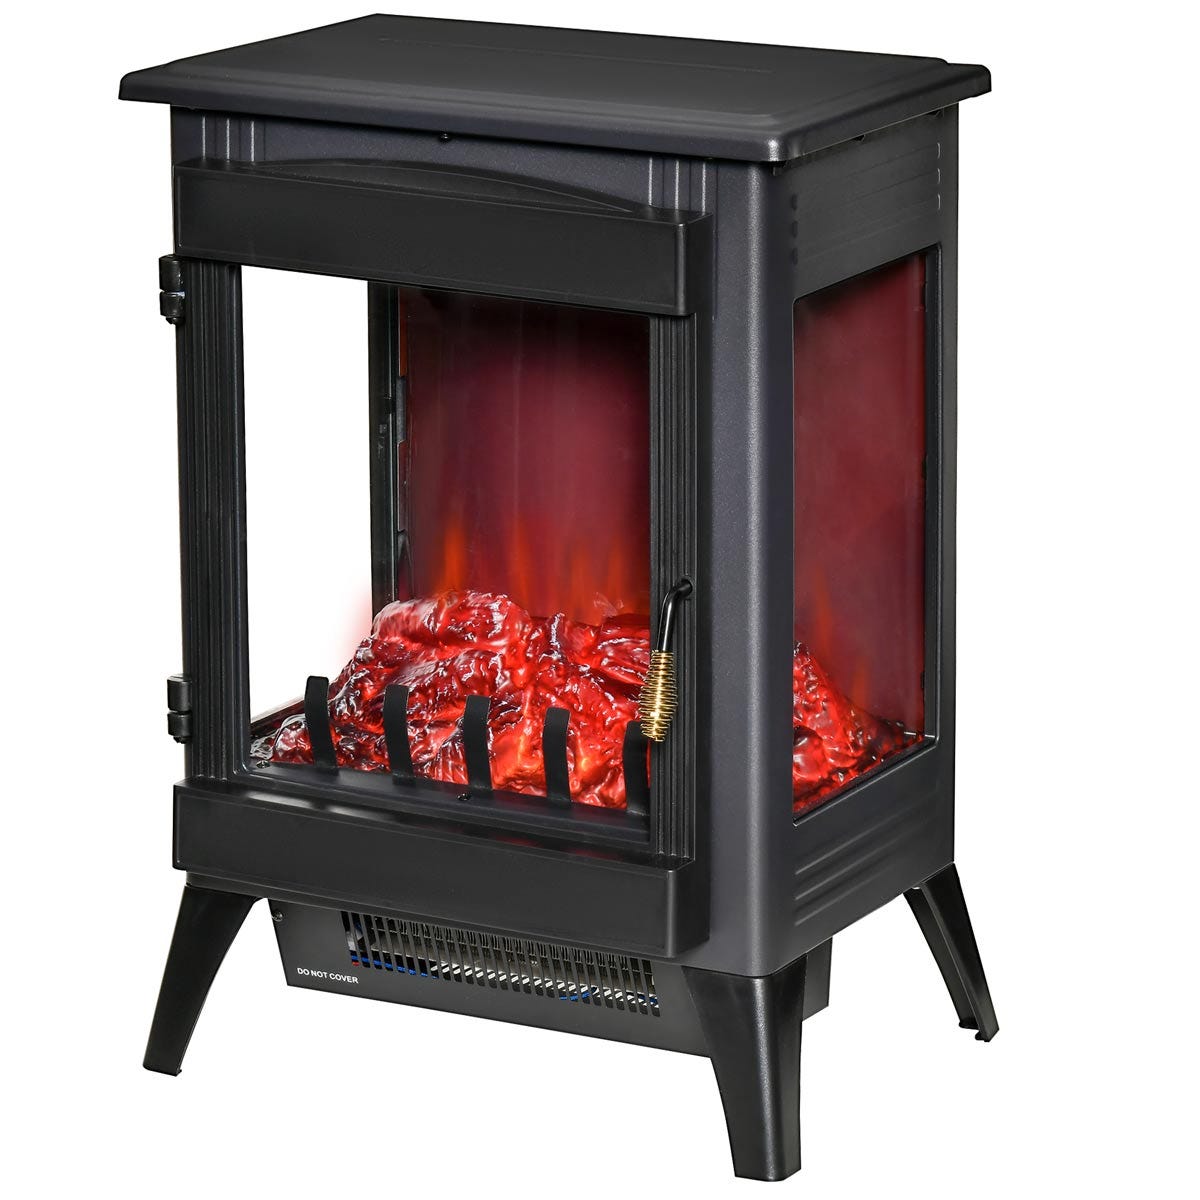 Etna Freestanding Electric Fireplace Stove with LED Flame Effect - Black